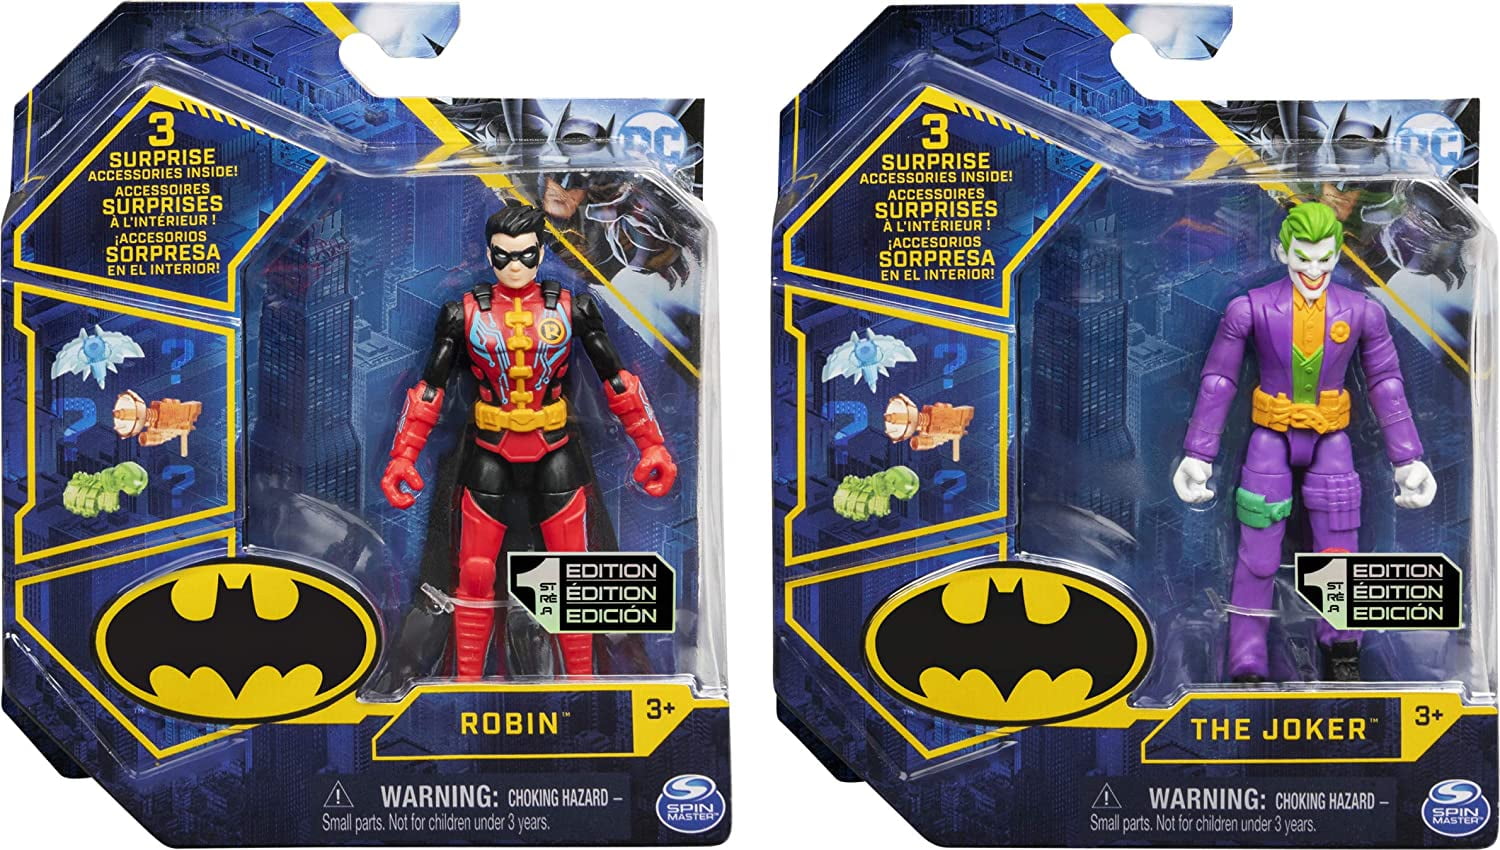 3 DC Comics Figures Spin Master 2021 Tech Wave 2 Joker and 1 Robin 1st Edition for sale online 